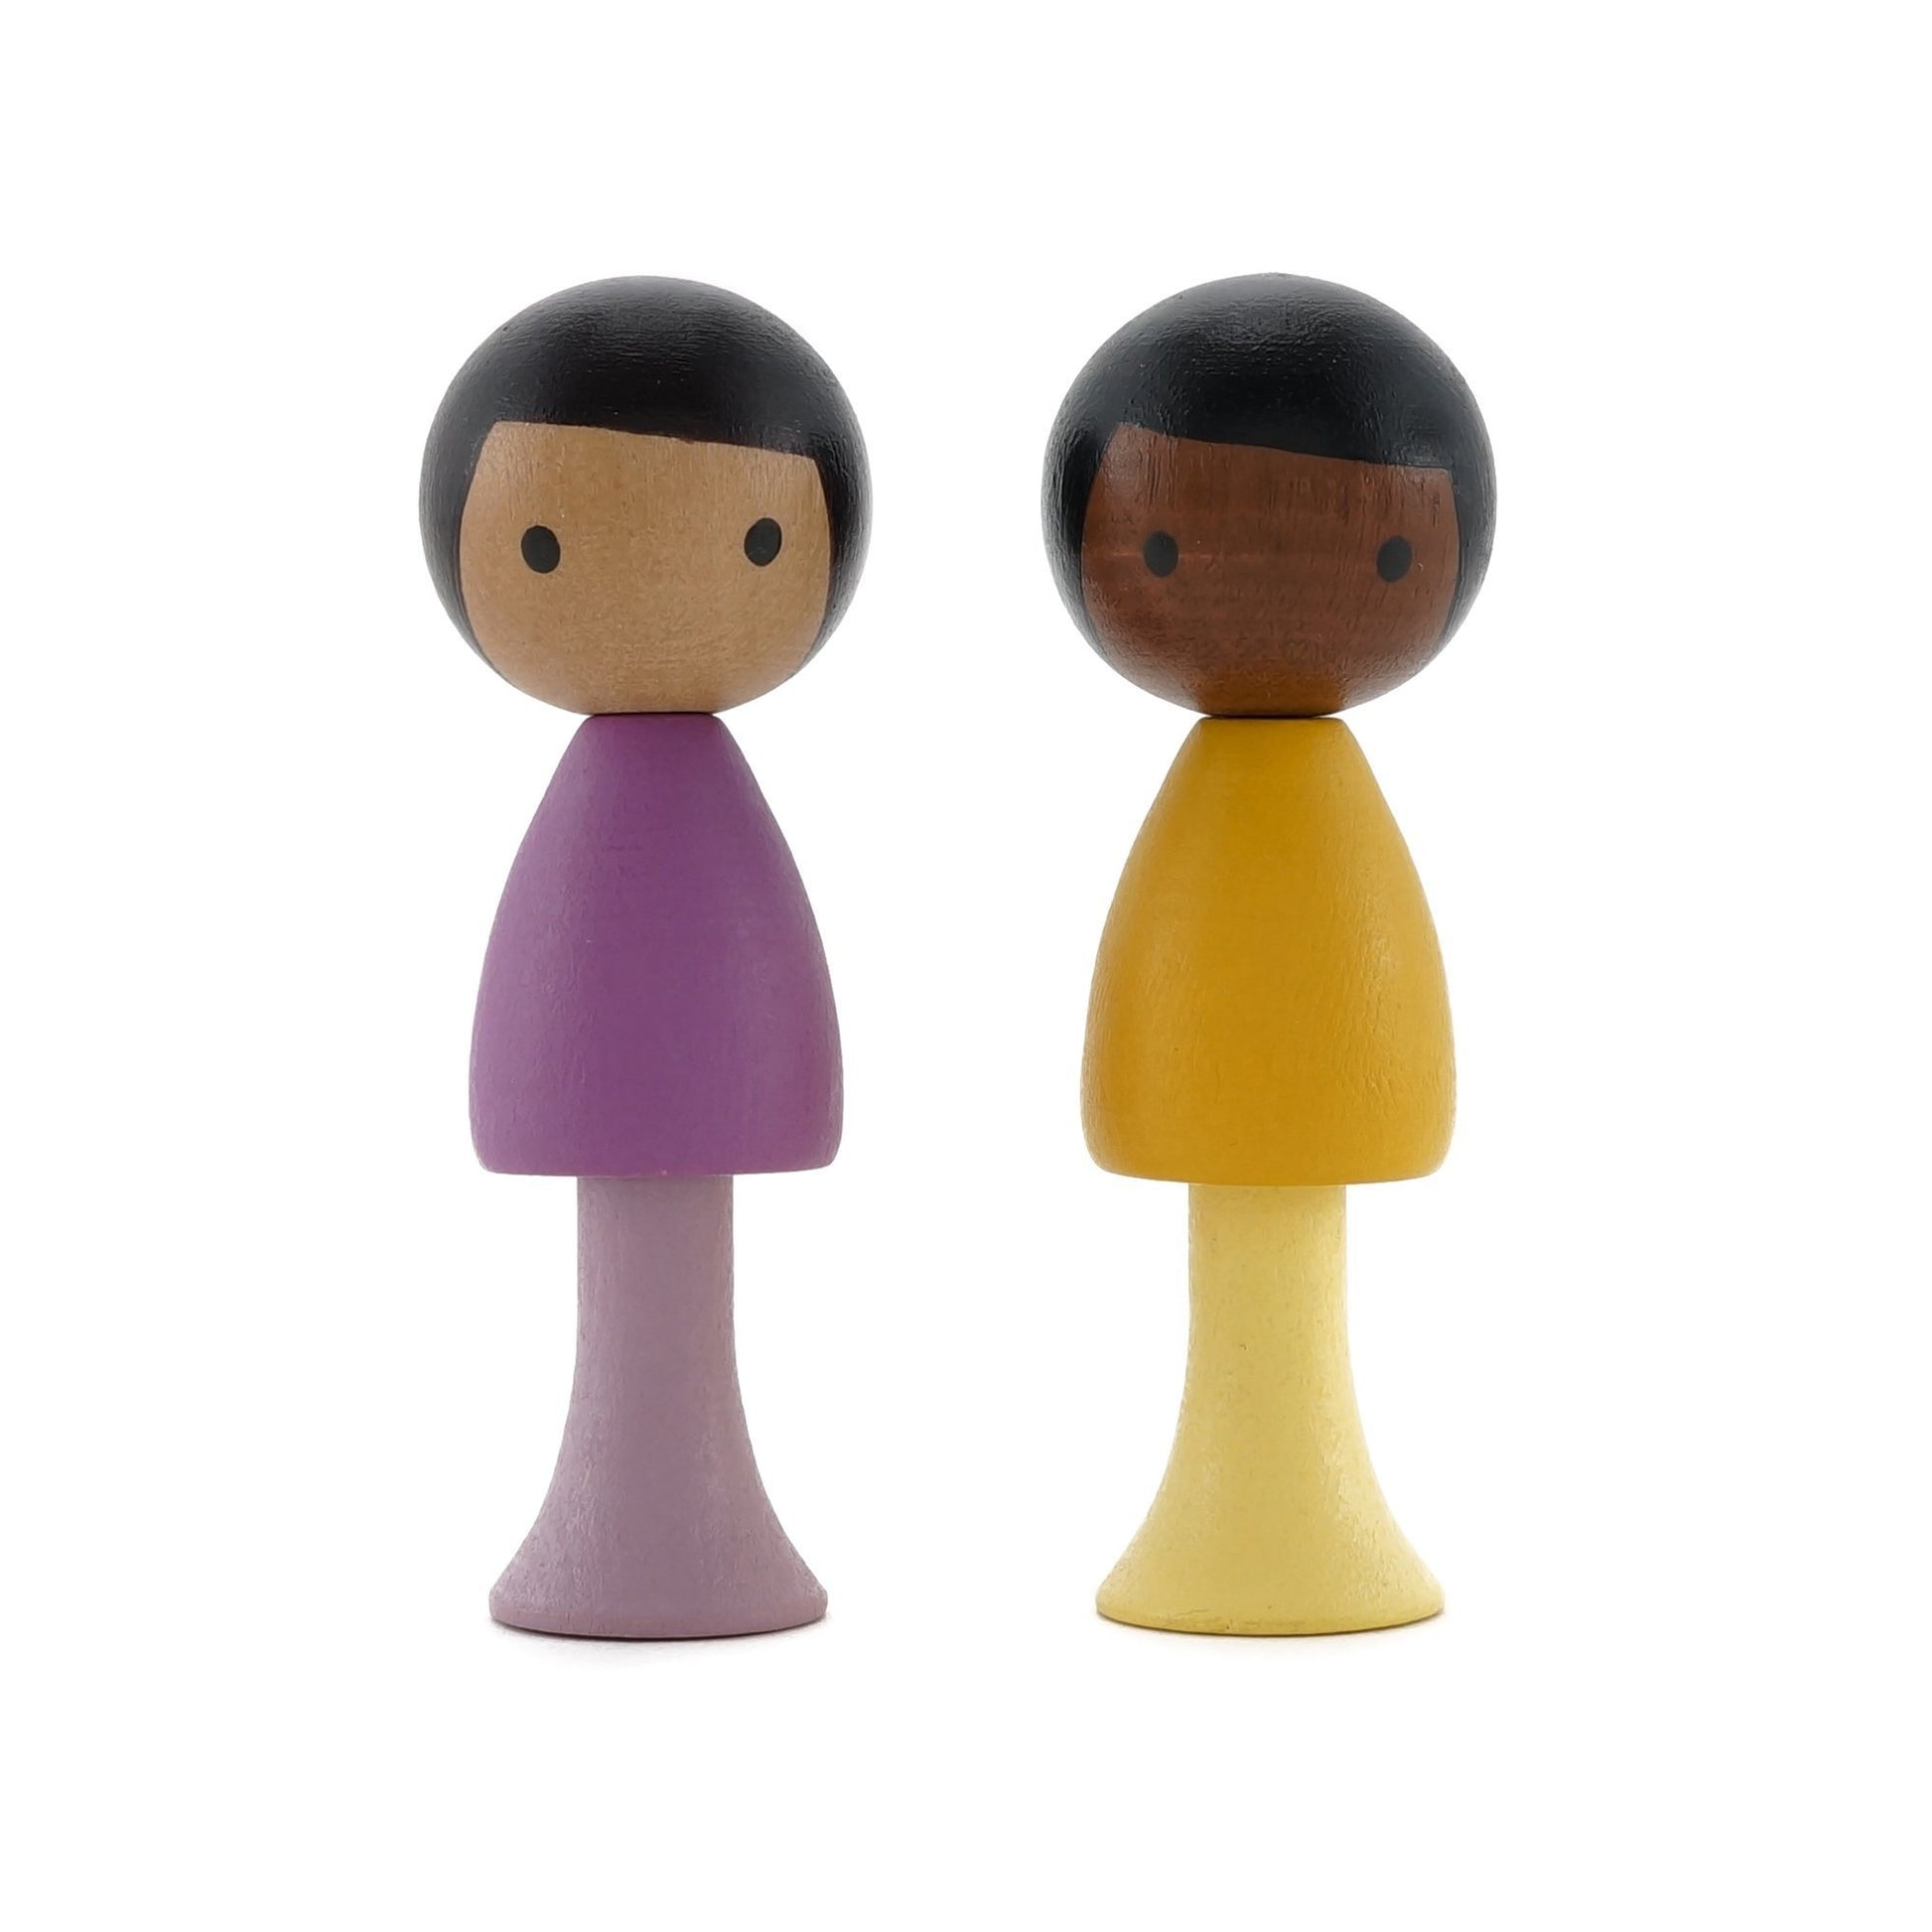 CLiCQUES Magnetic Figurines - Pablo & Leo - Wood Wood Toys Canada's Favourite Montessori Toy Store